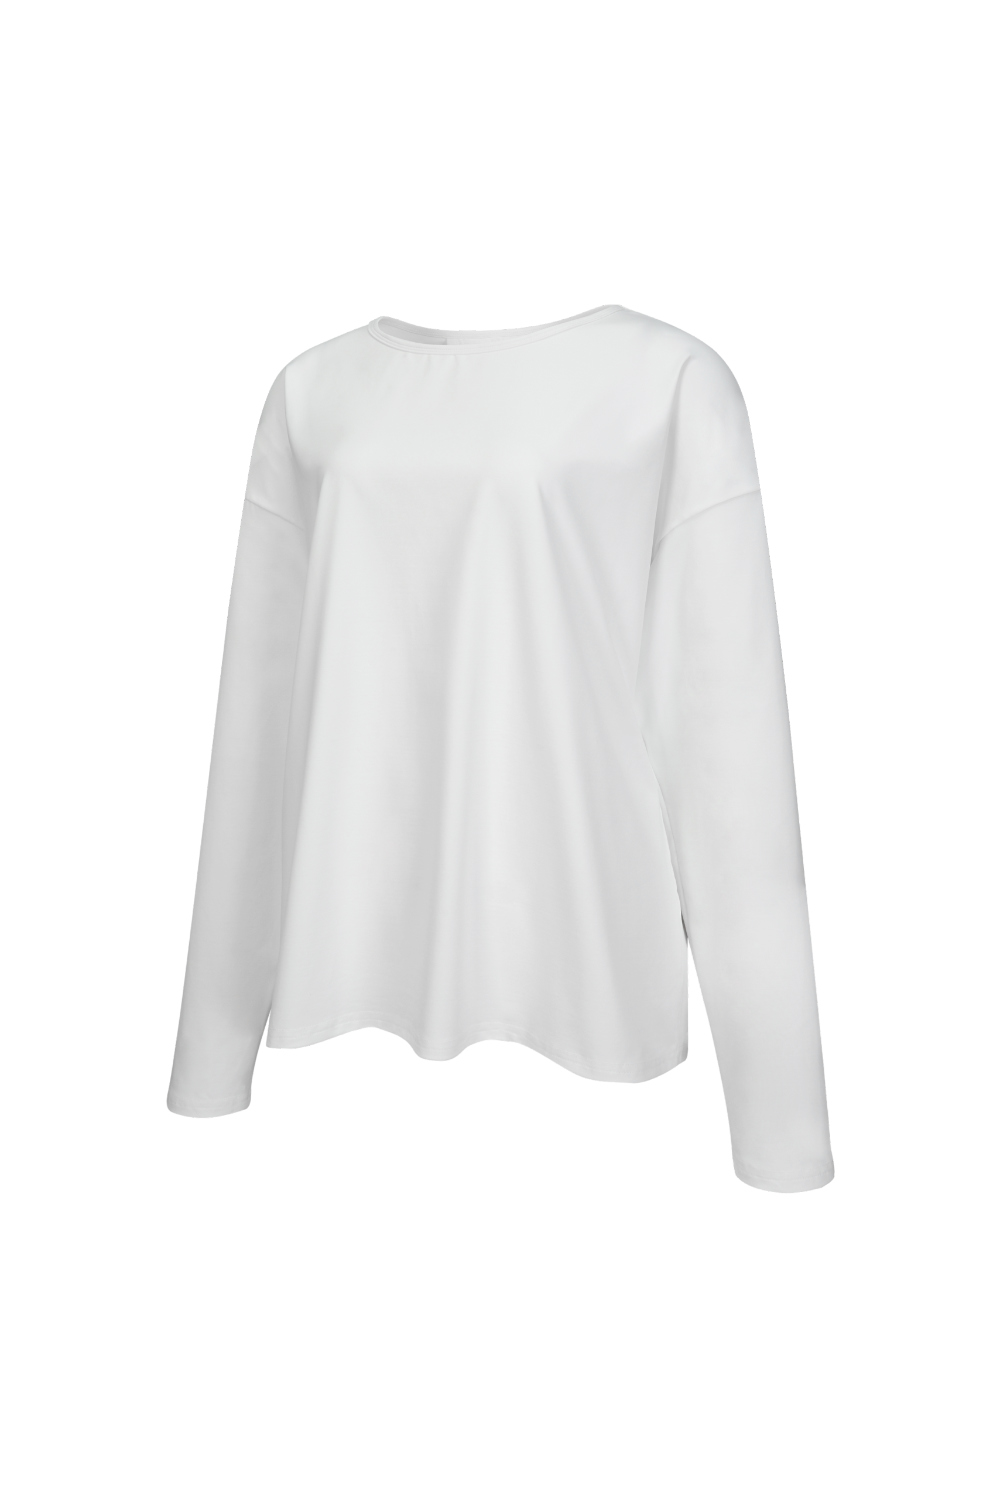 long sleeved tee white color image-S1L58